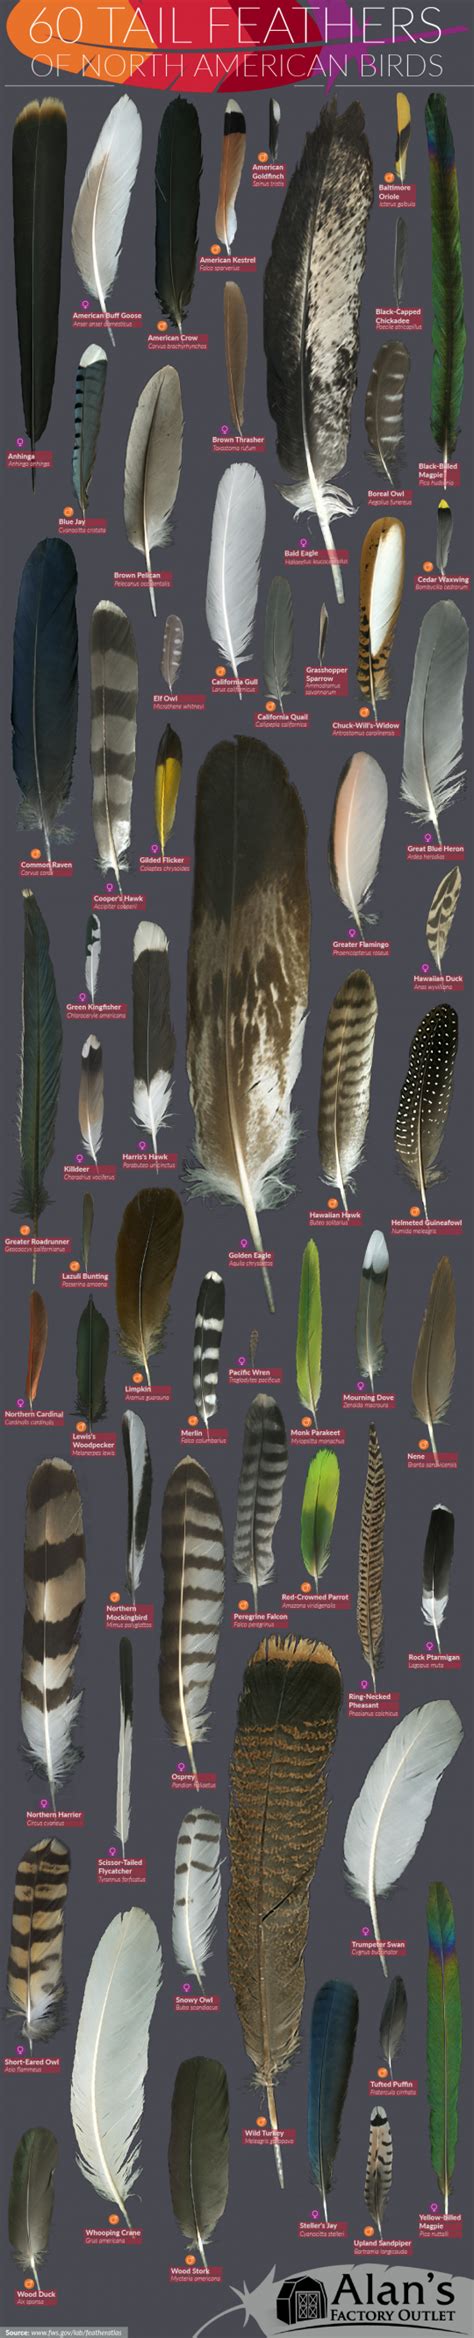 How To Identify Bird Feathers [infographic] Effortless Outdoors Identifying Birds Beautiful